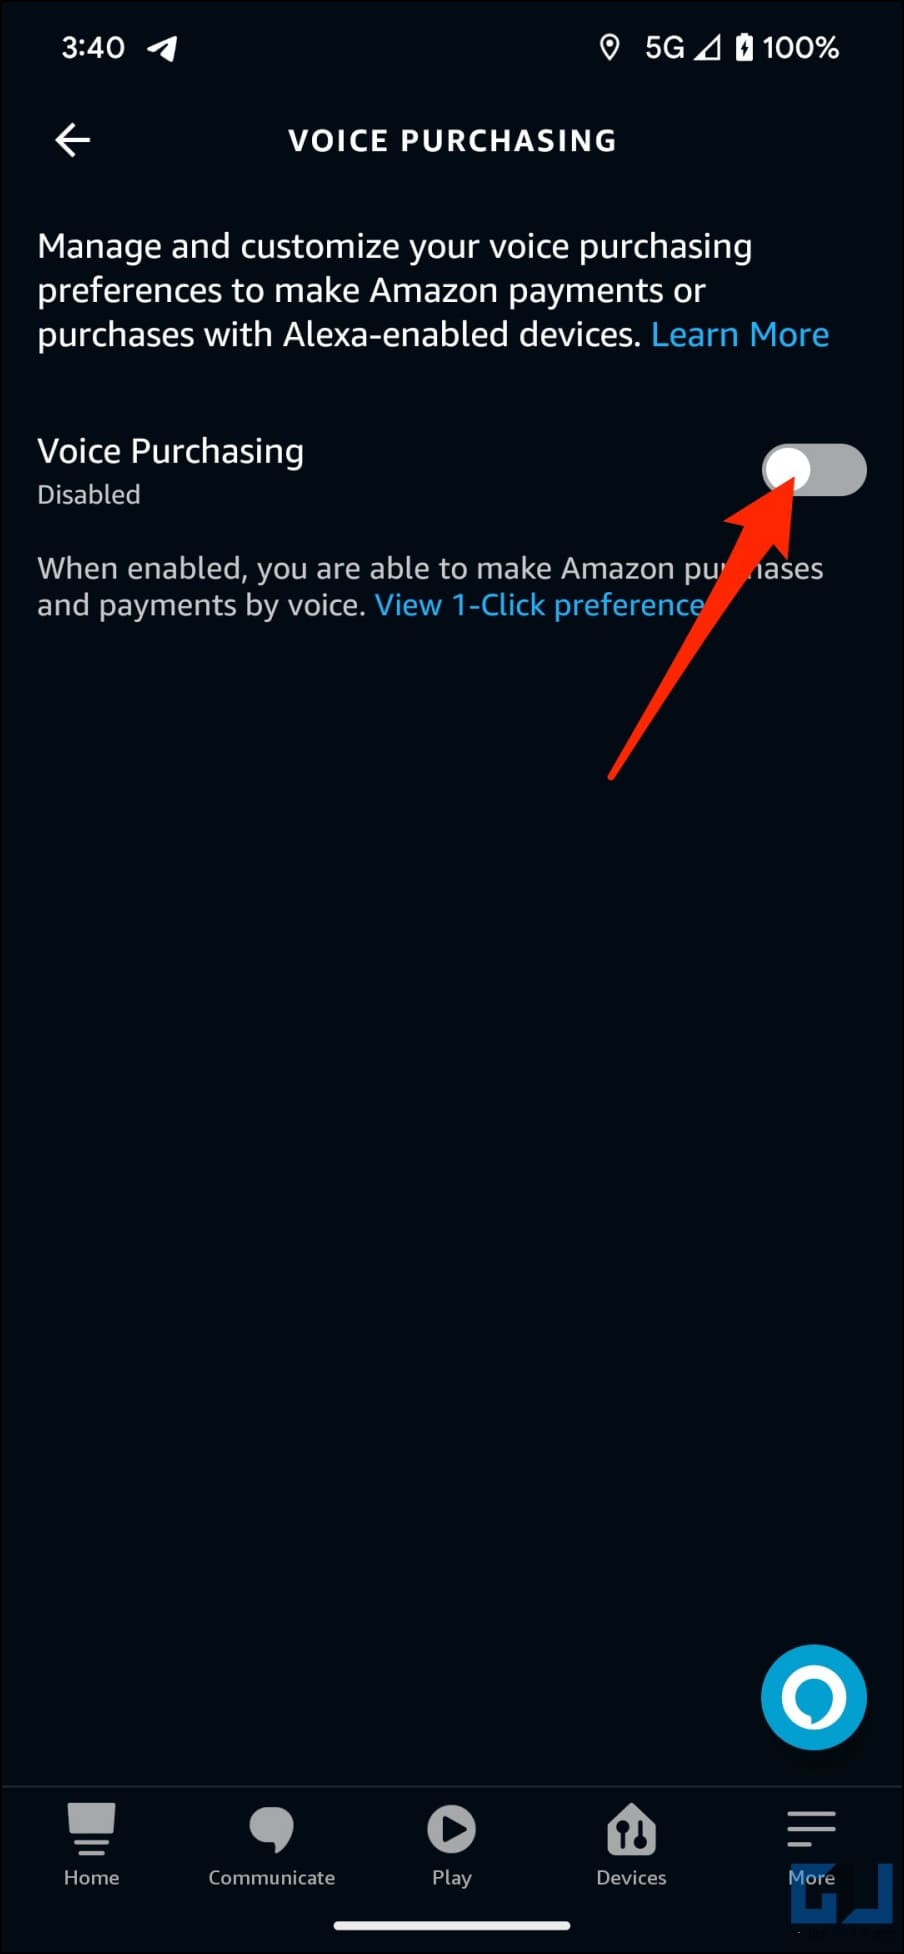 Enable Voice Purchases on Alexa